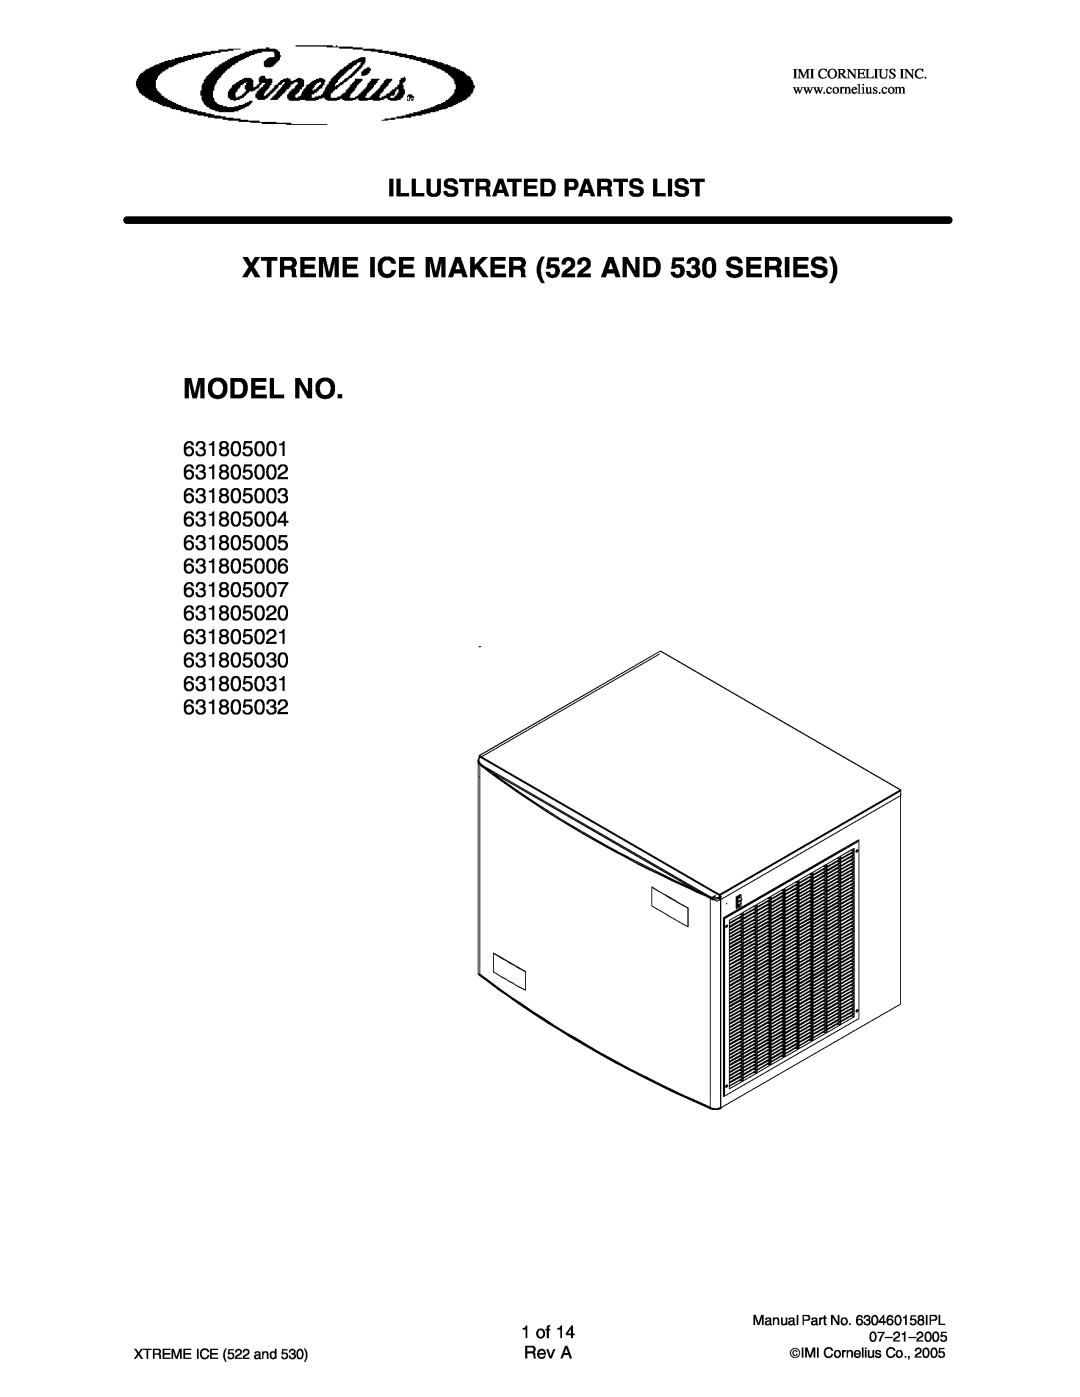 Cornelius 631805021, 631805032 manual XTREME ICE MAKER 522 AND 530 SERIES MODEL NO, Illustrated Parts List, 1 of, Rev A 